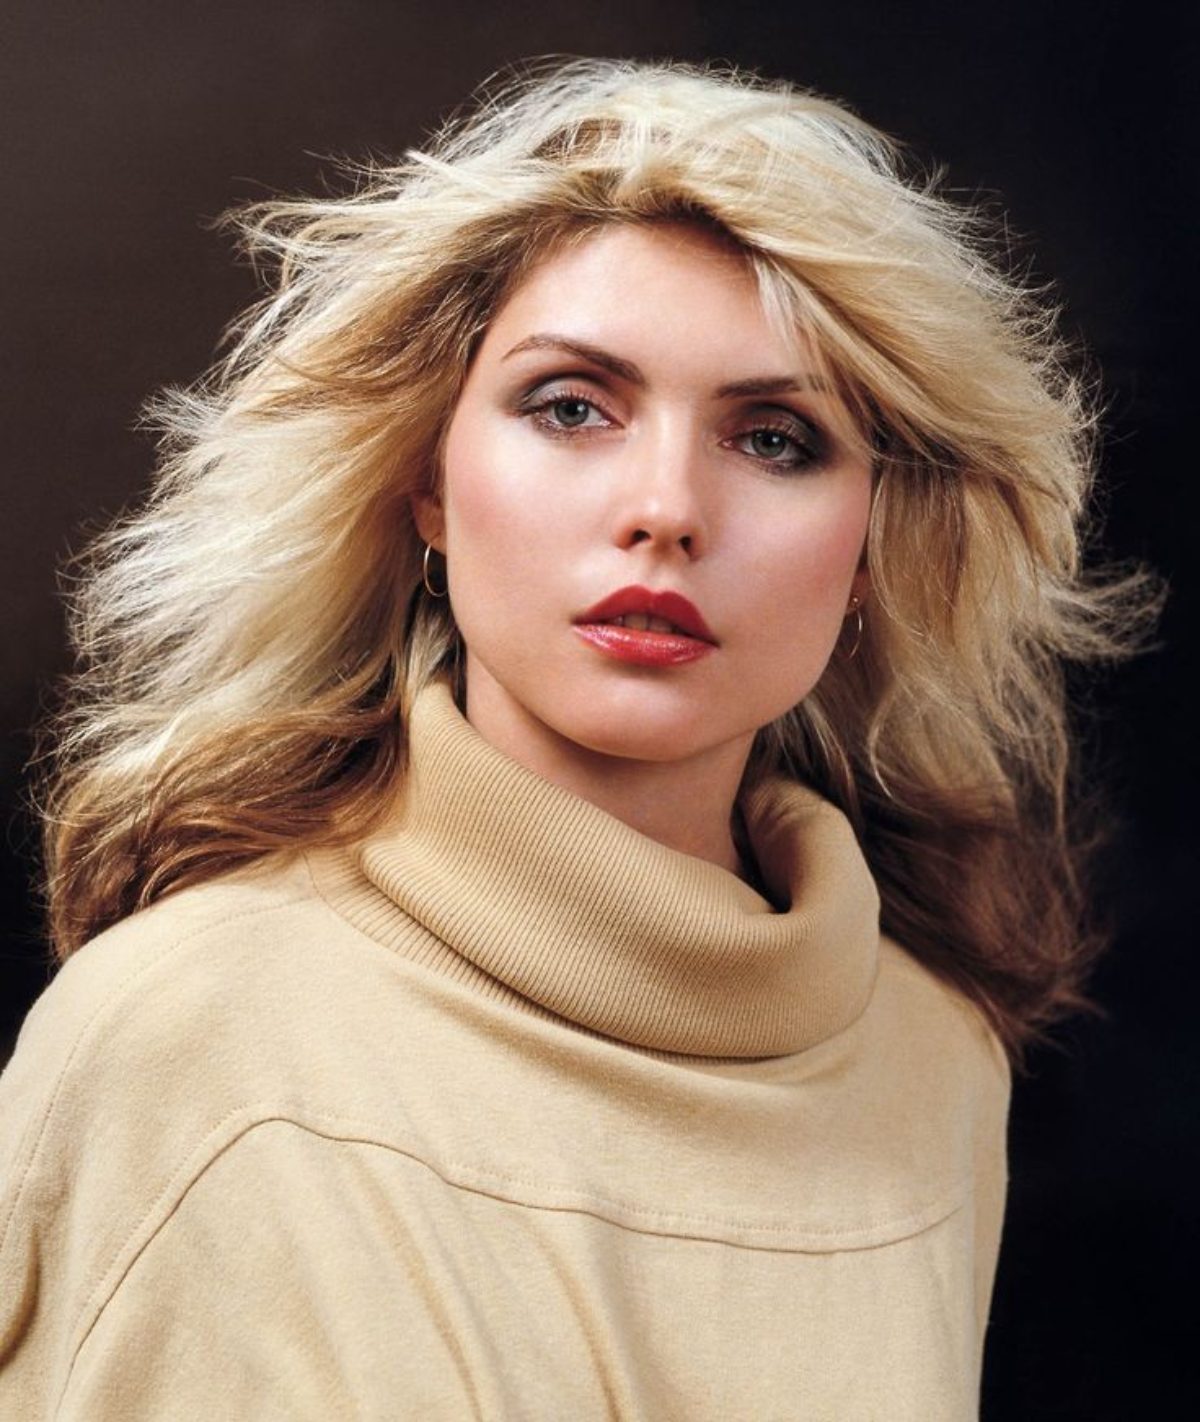 The band's lead singer Debbie Harry